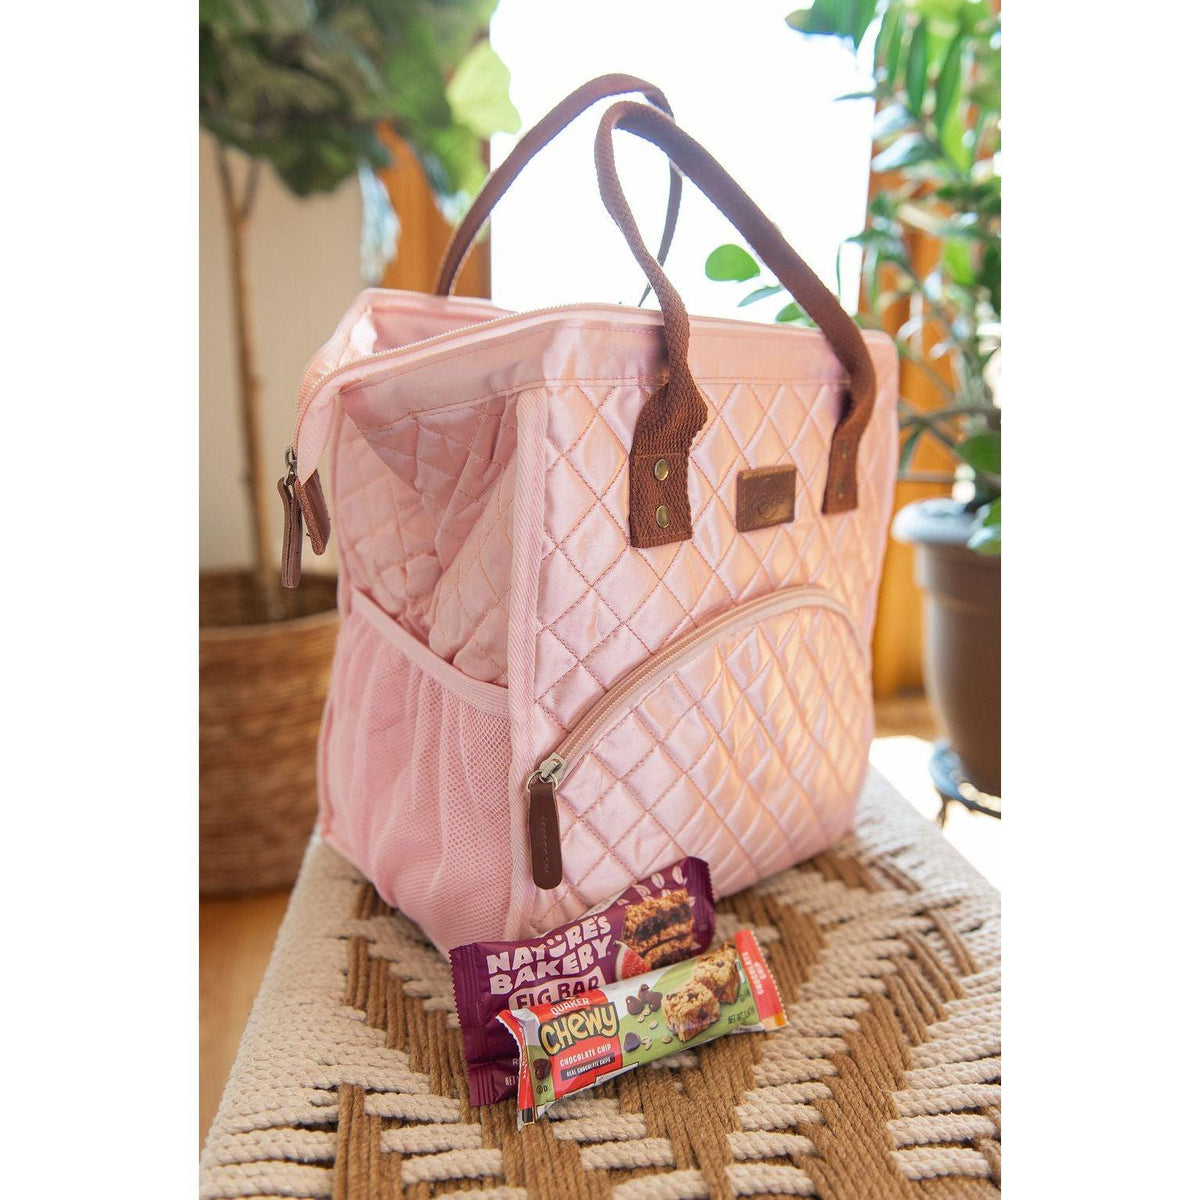 Women's Cooler Lunch Bag | The Classy Cloth - becauseofadi